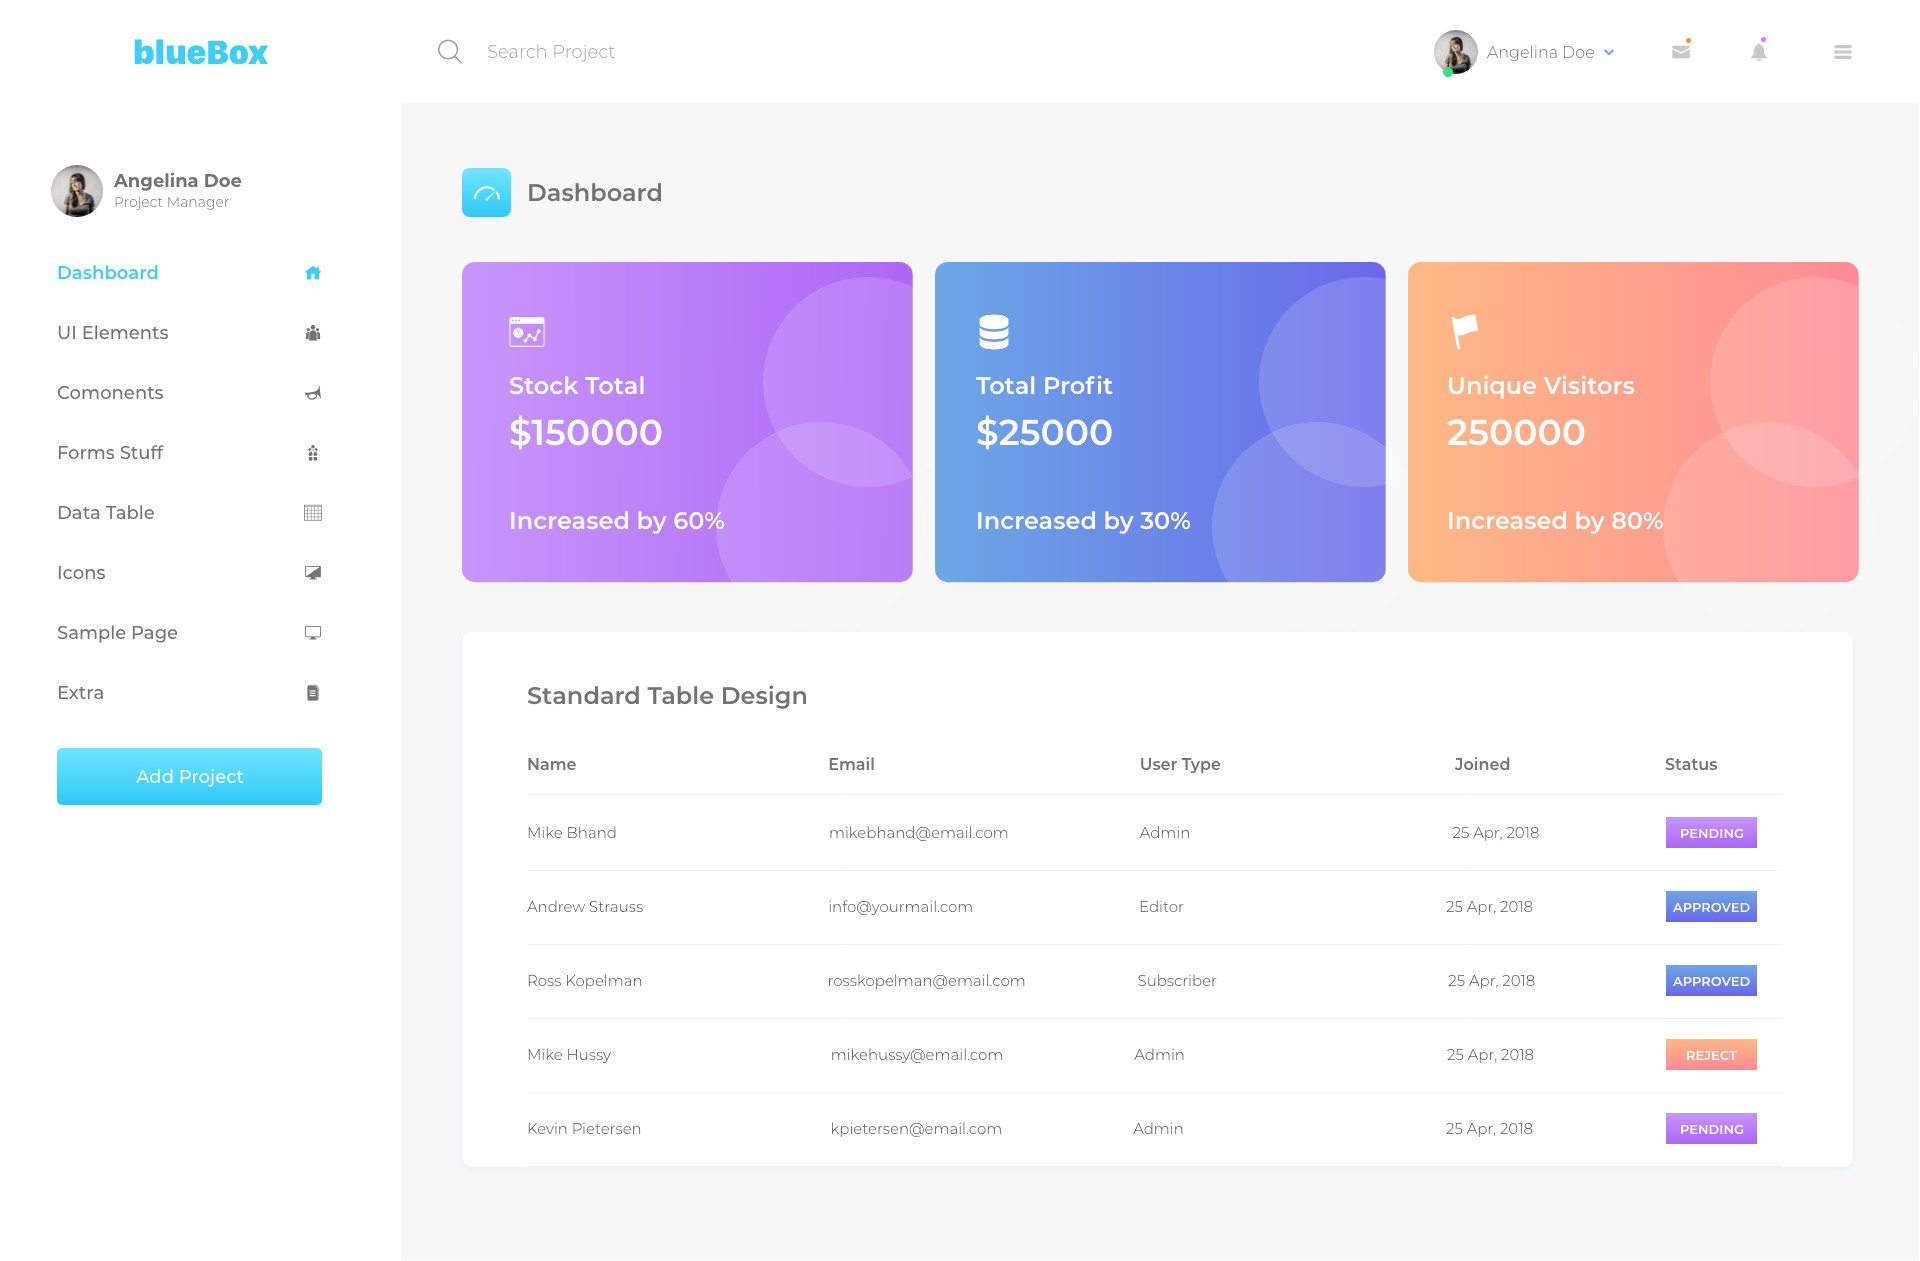 Bootstrap 4 Card No Border Bluebox Dashboard Dribble Design Challenge Code Review